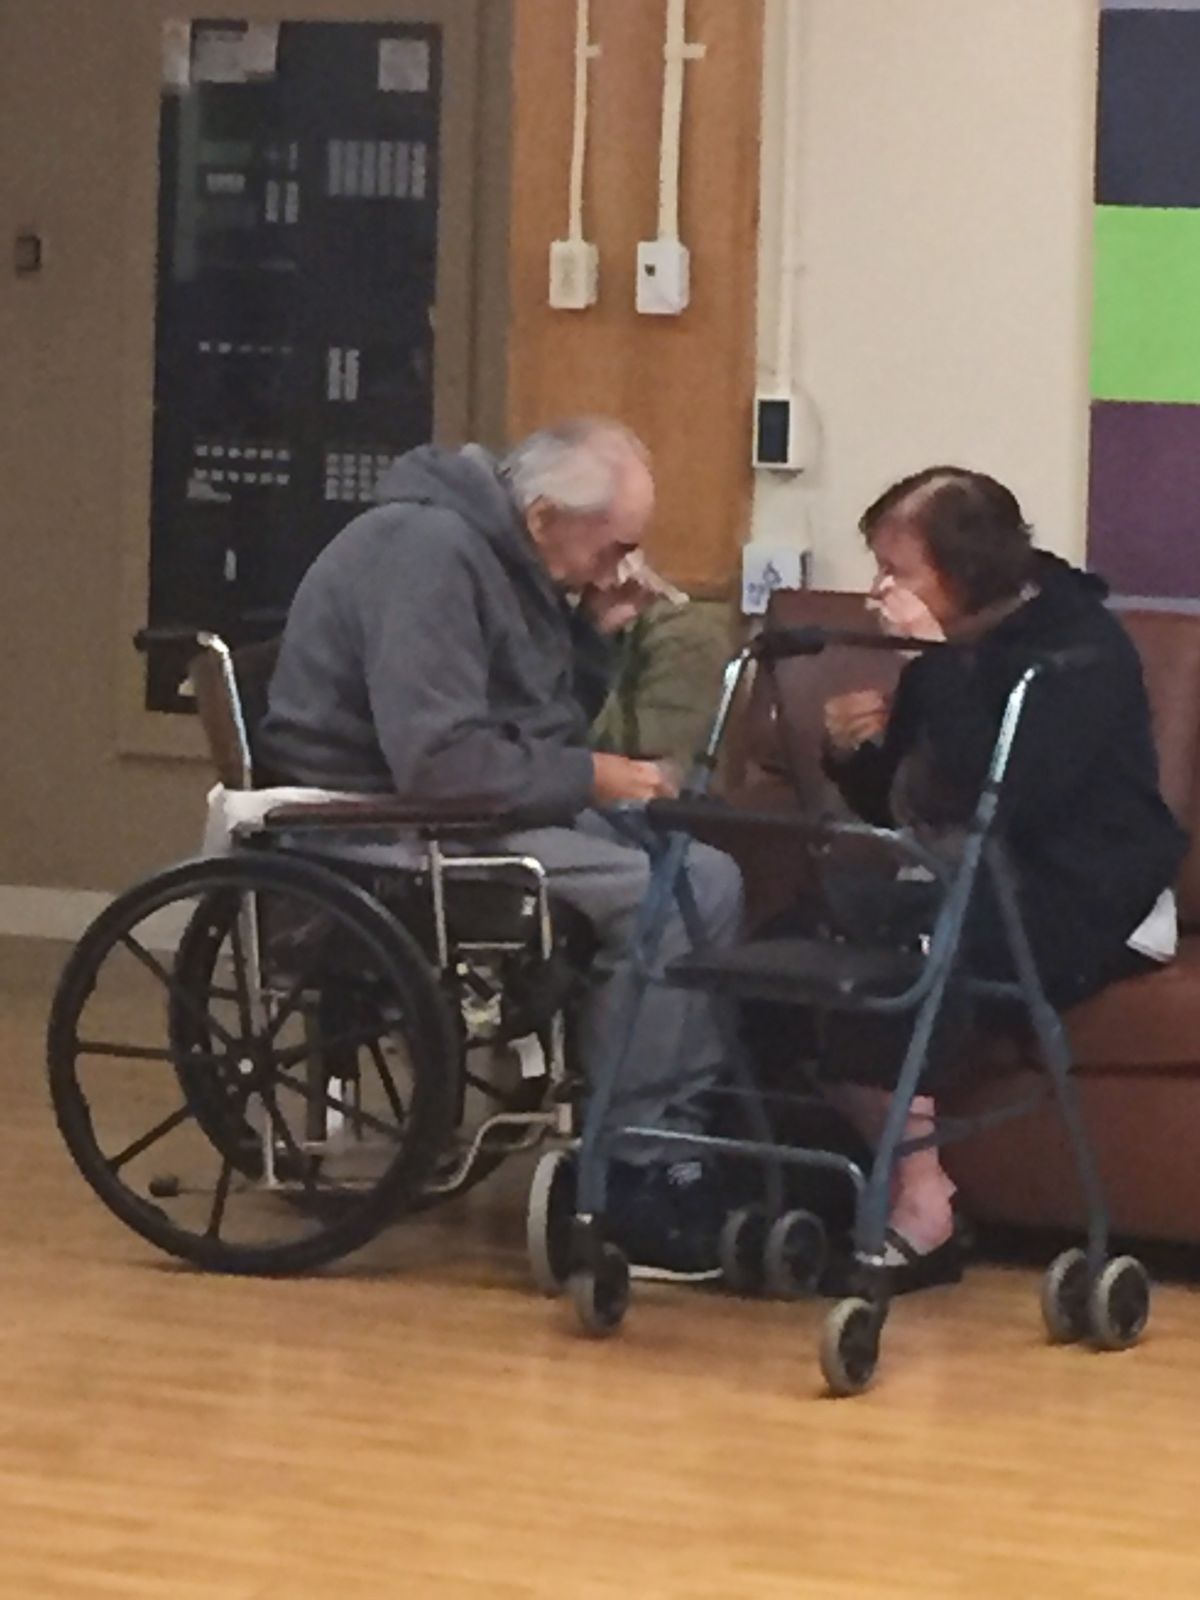 In this Monday, Aug. 22, 2016 photo provided by Ashley Bartyik, her grandparents Wolfram and Anita Gottschalk of Surrey, British Columbia, Canada, cry as they say goodbye near the end of a visit with each other in Wolfram's elderly care home in Surrey. The couple, who are in their 80s, were separated into two different care homes a half an hour apart after 62 years of marriage because no beds were available together. (Ashley Bartyik via AP) (AP)